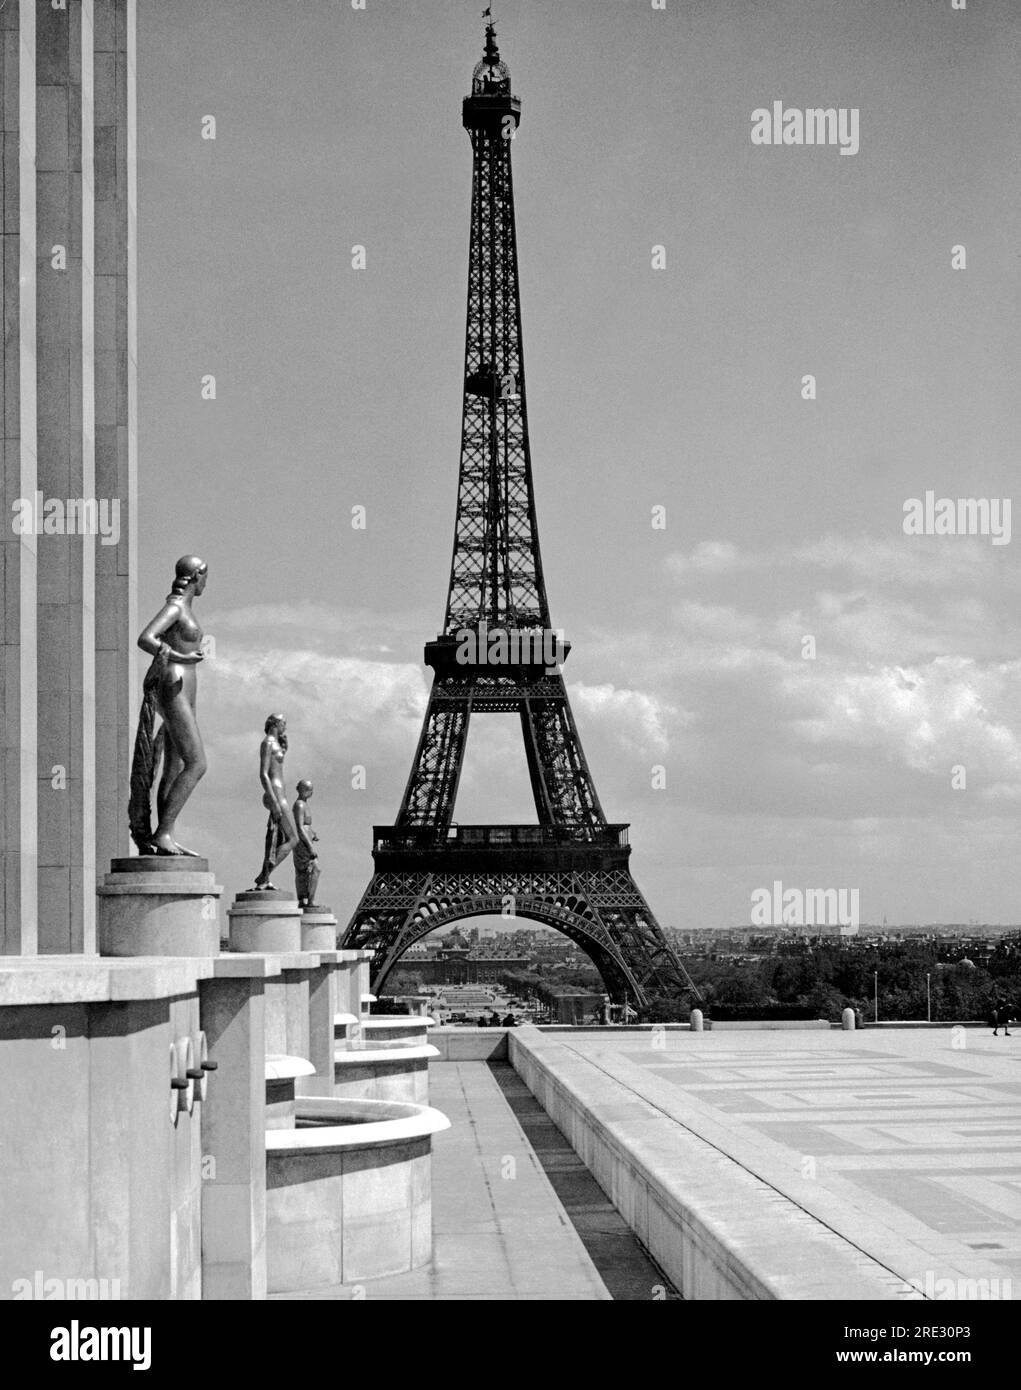 Paris, France:  c. 1935 The Eiffel Tower as seen from in front of the Trocadero in Paris. Stock Photo